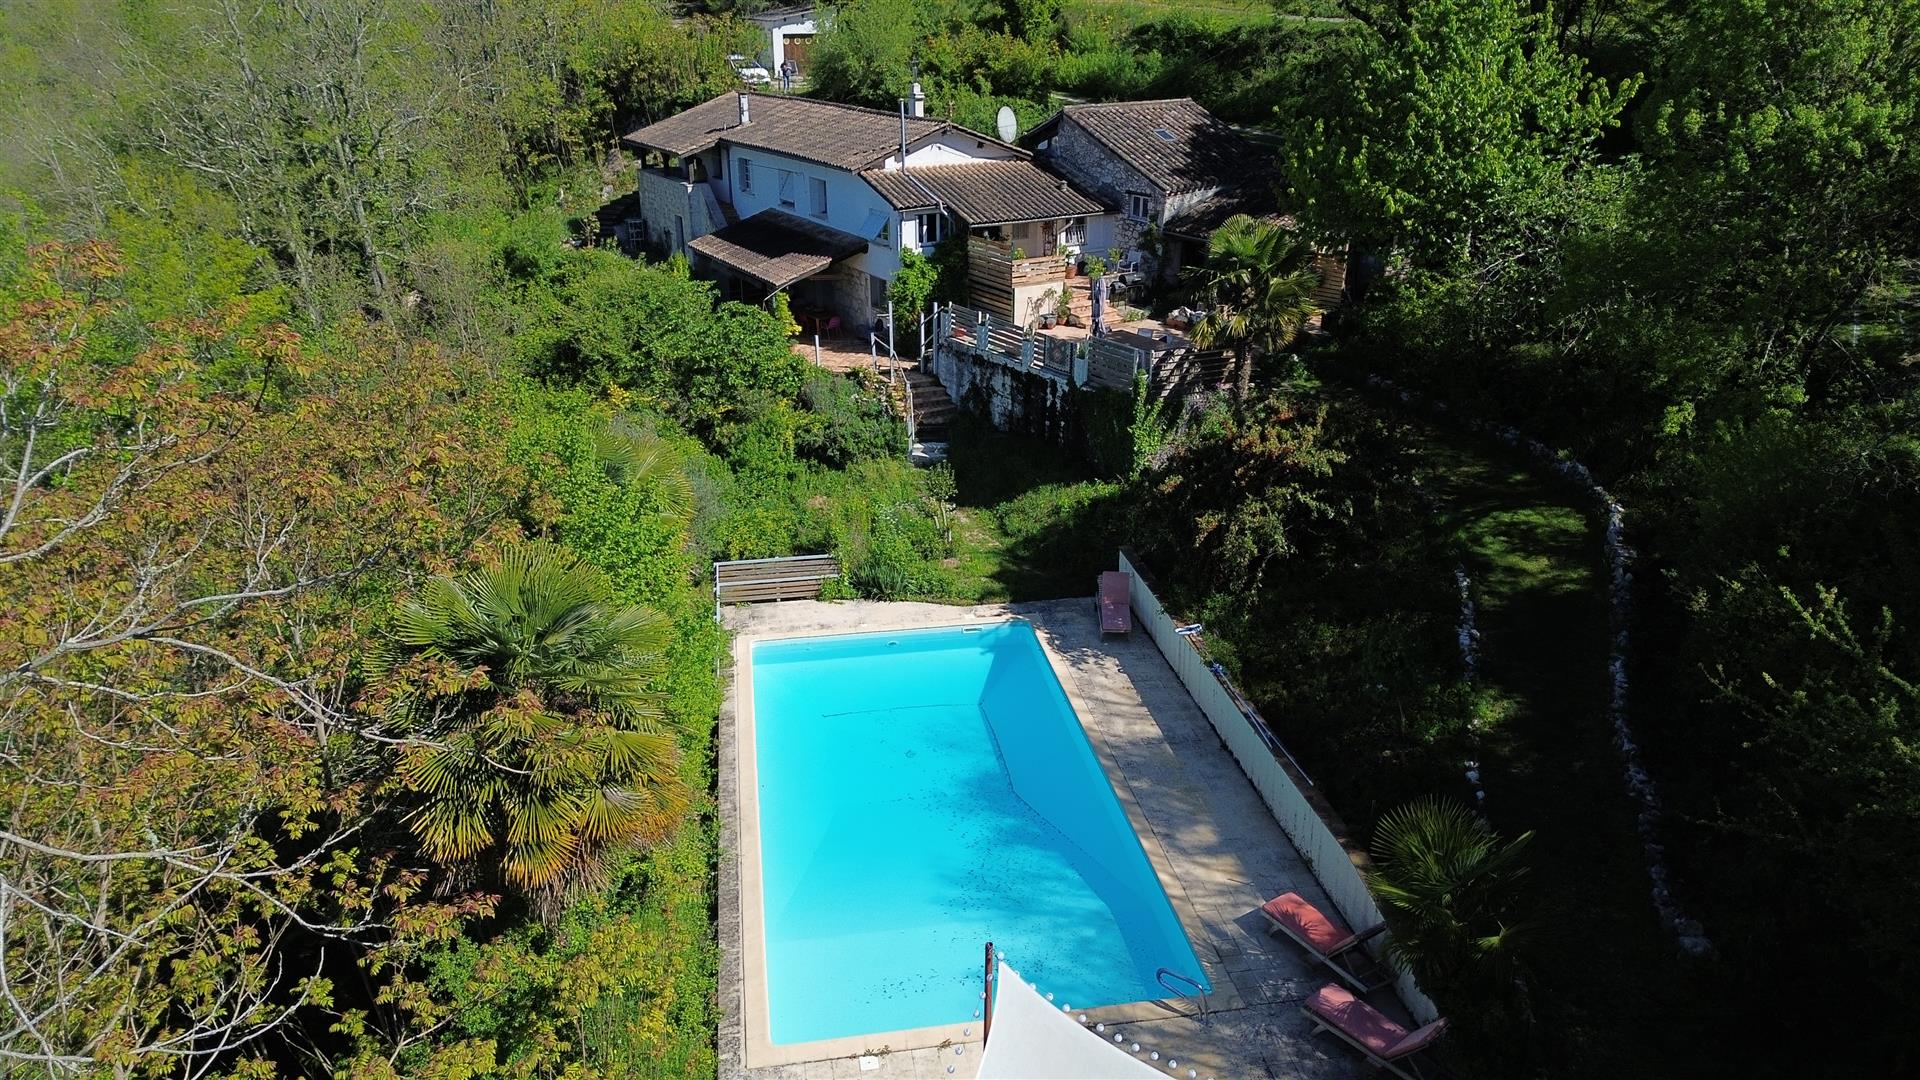  Tarn Et Garonne 3 bed  house with pool, 2+hectares incredible view